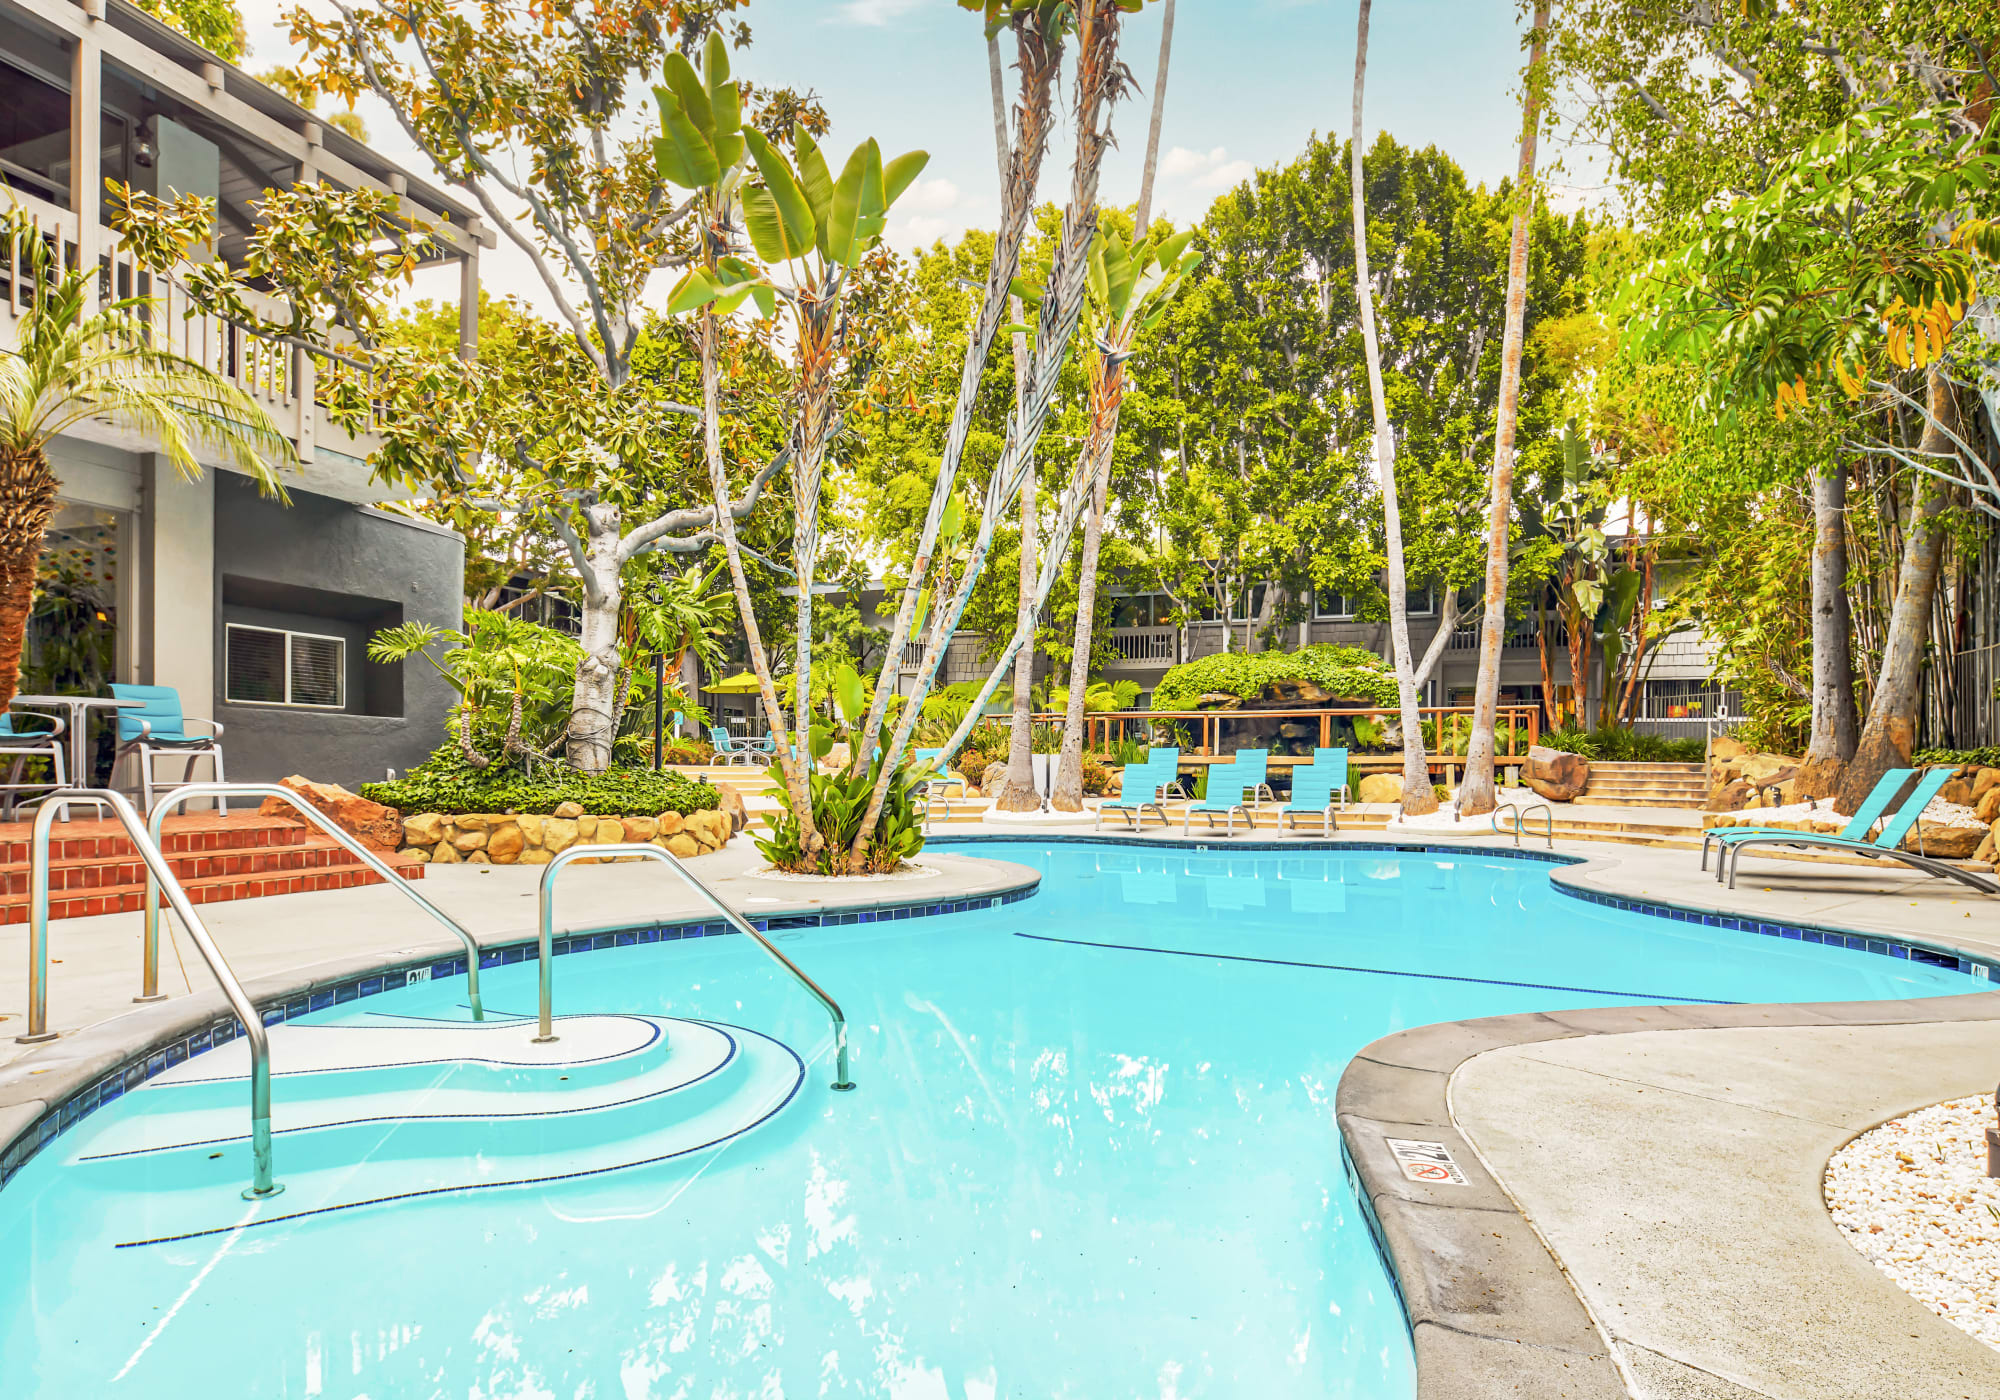 Resort-style swimming pool surrounded by mature trees at Rancho Los Feliz in Los Angeles, California